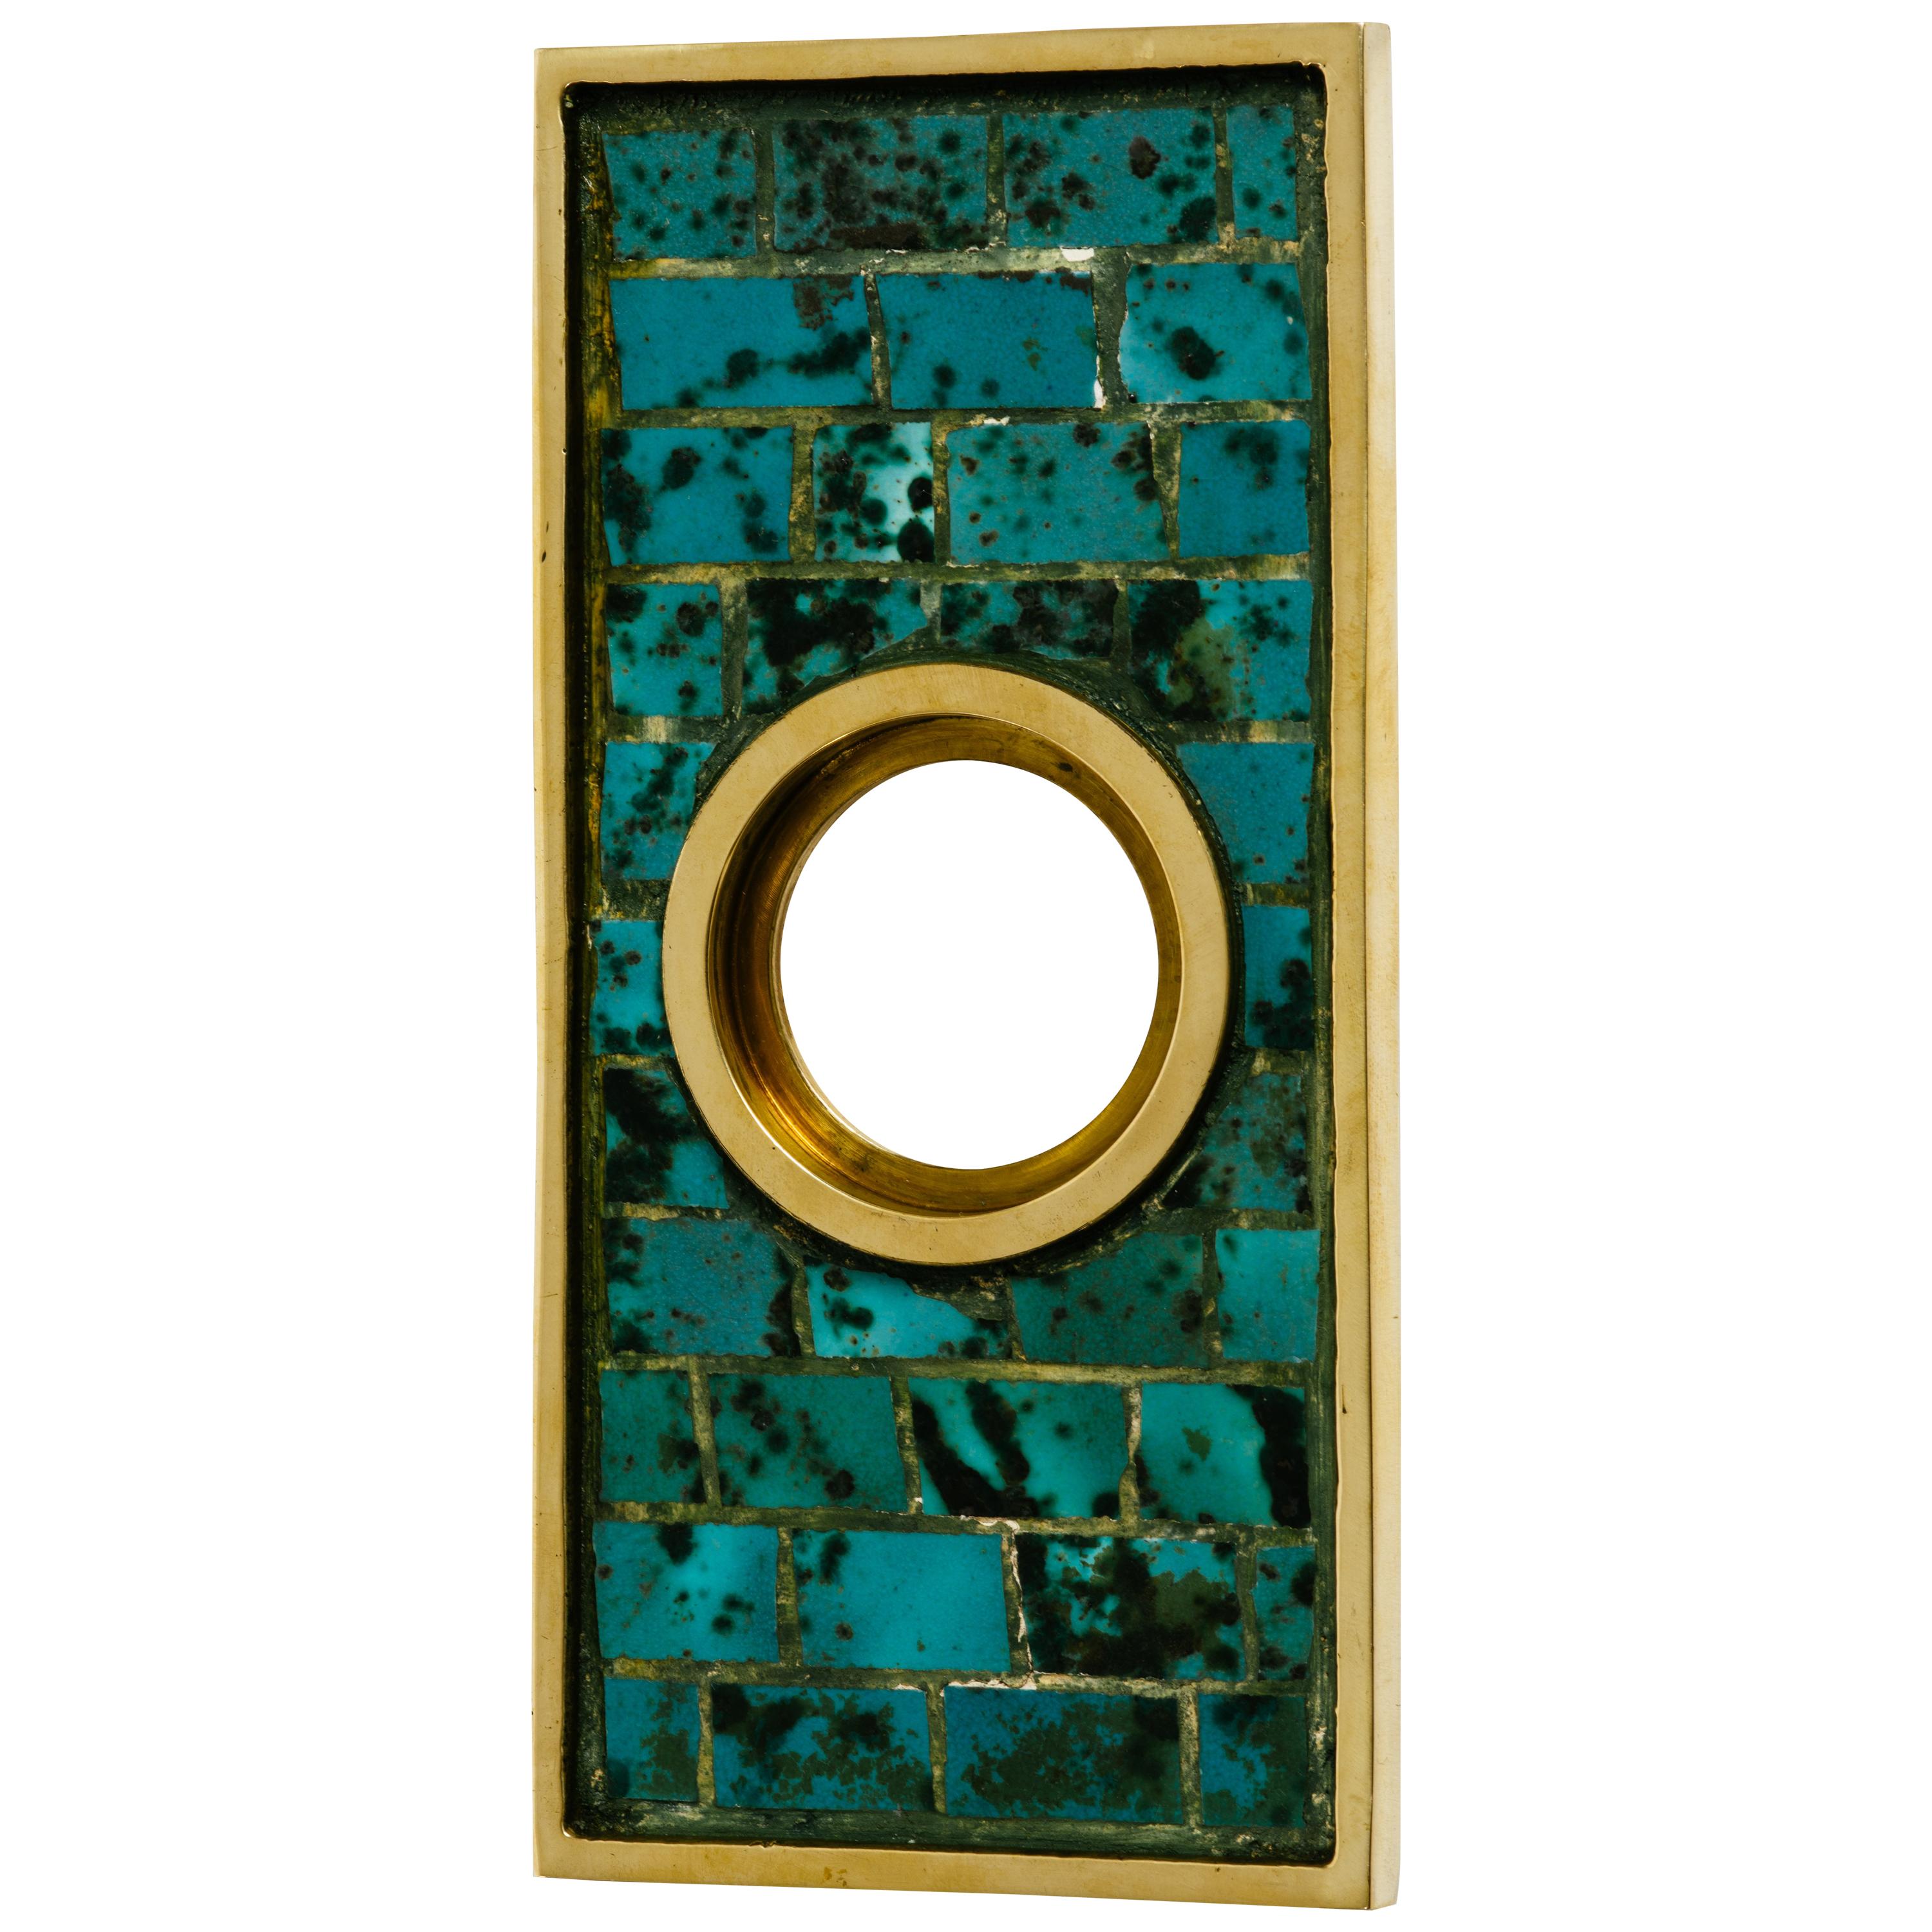 Mexican Hand-Wrought Brass and Stone Door Escutcheon Plate